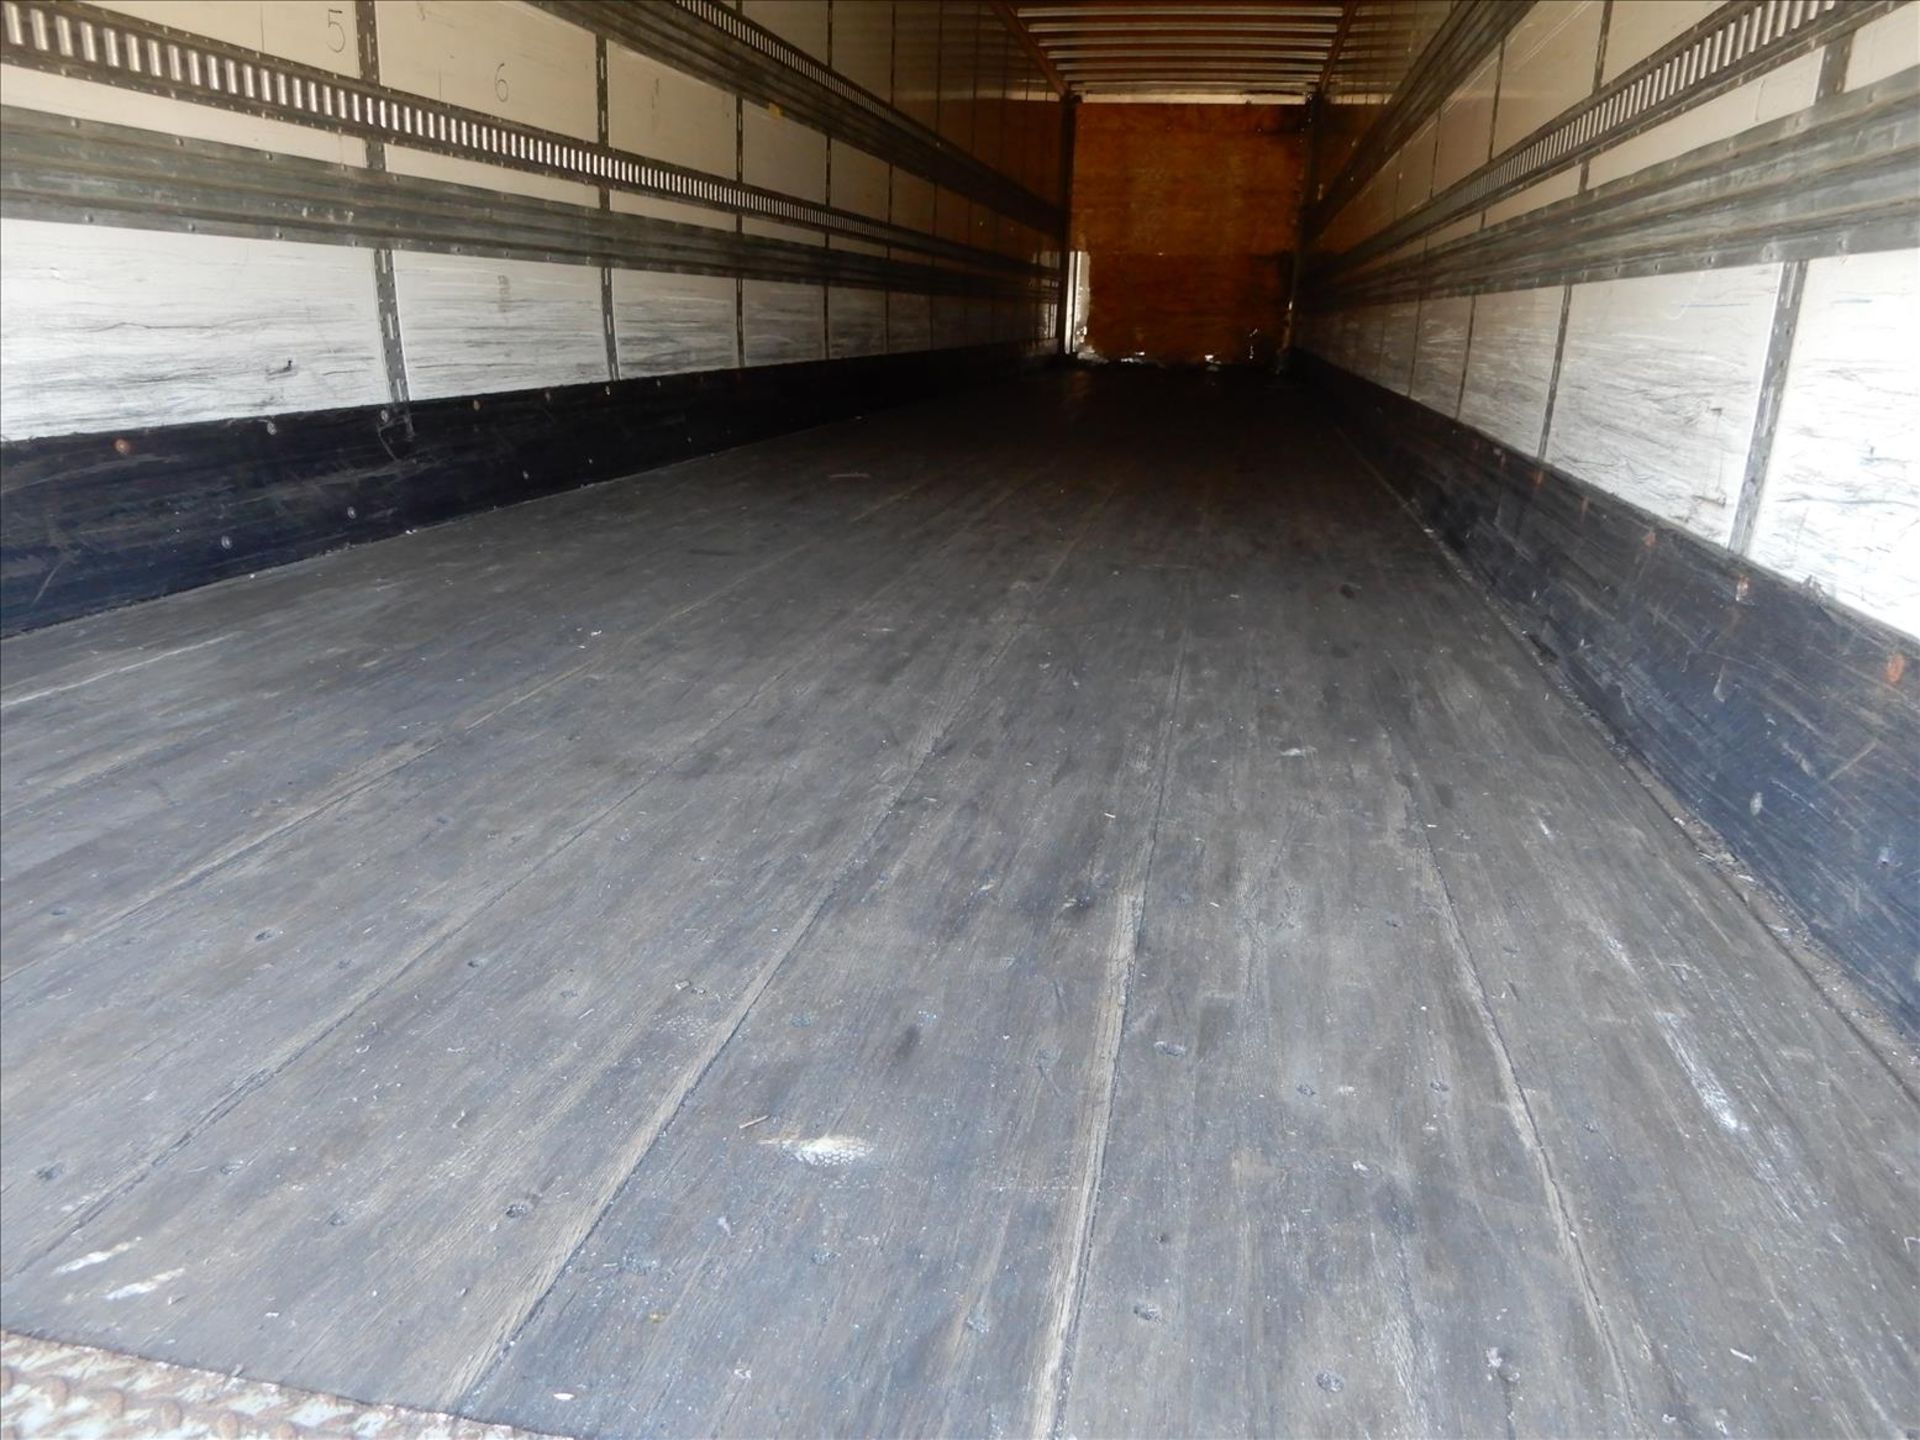 2012 Stoughton Trailer - Located in Indianapolis, IN - Image 17 of 20